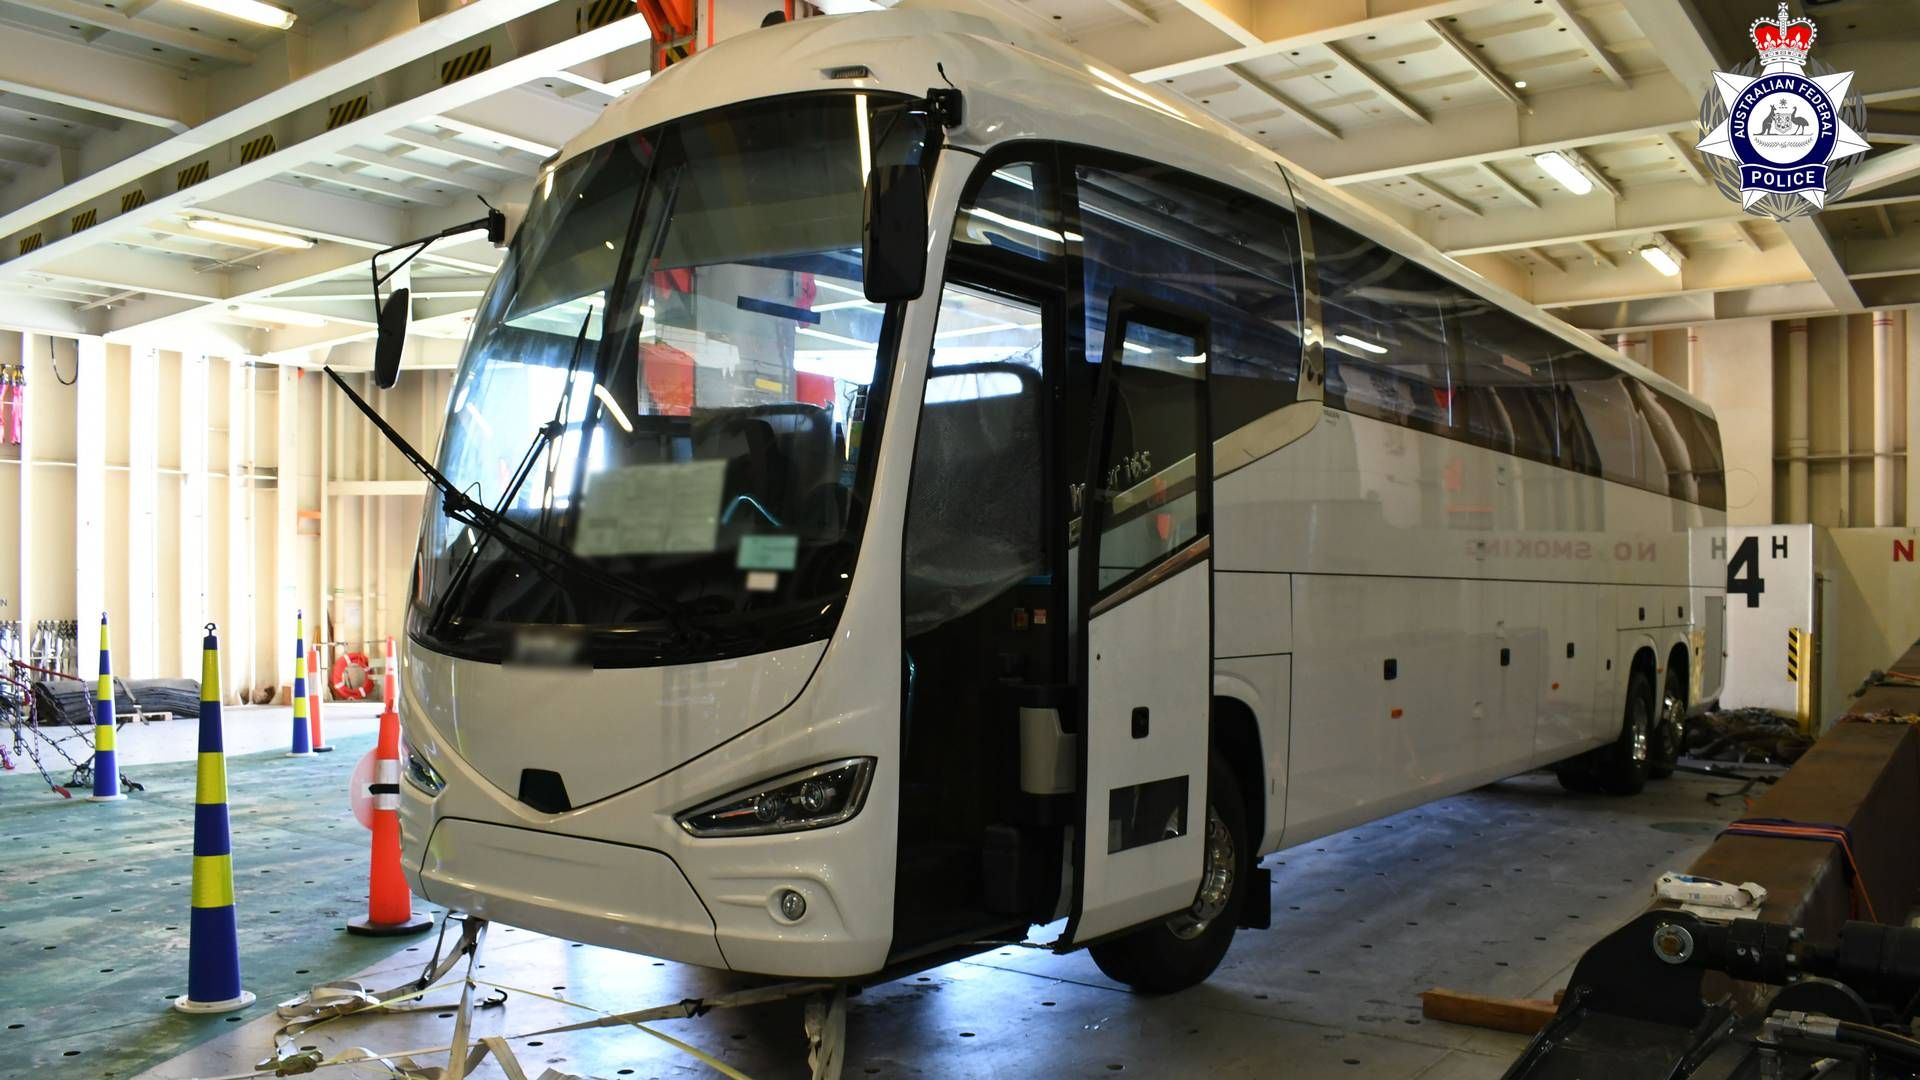 Luxury busses were used to transport almost 140 kilograms of cocaine from Singapore to Perth, | Photo: Australian Federal Police